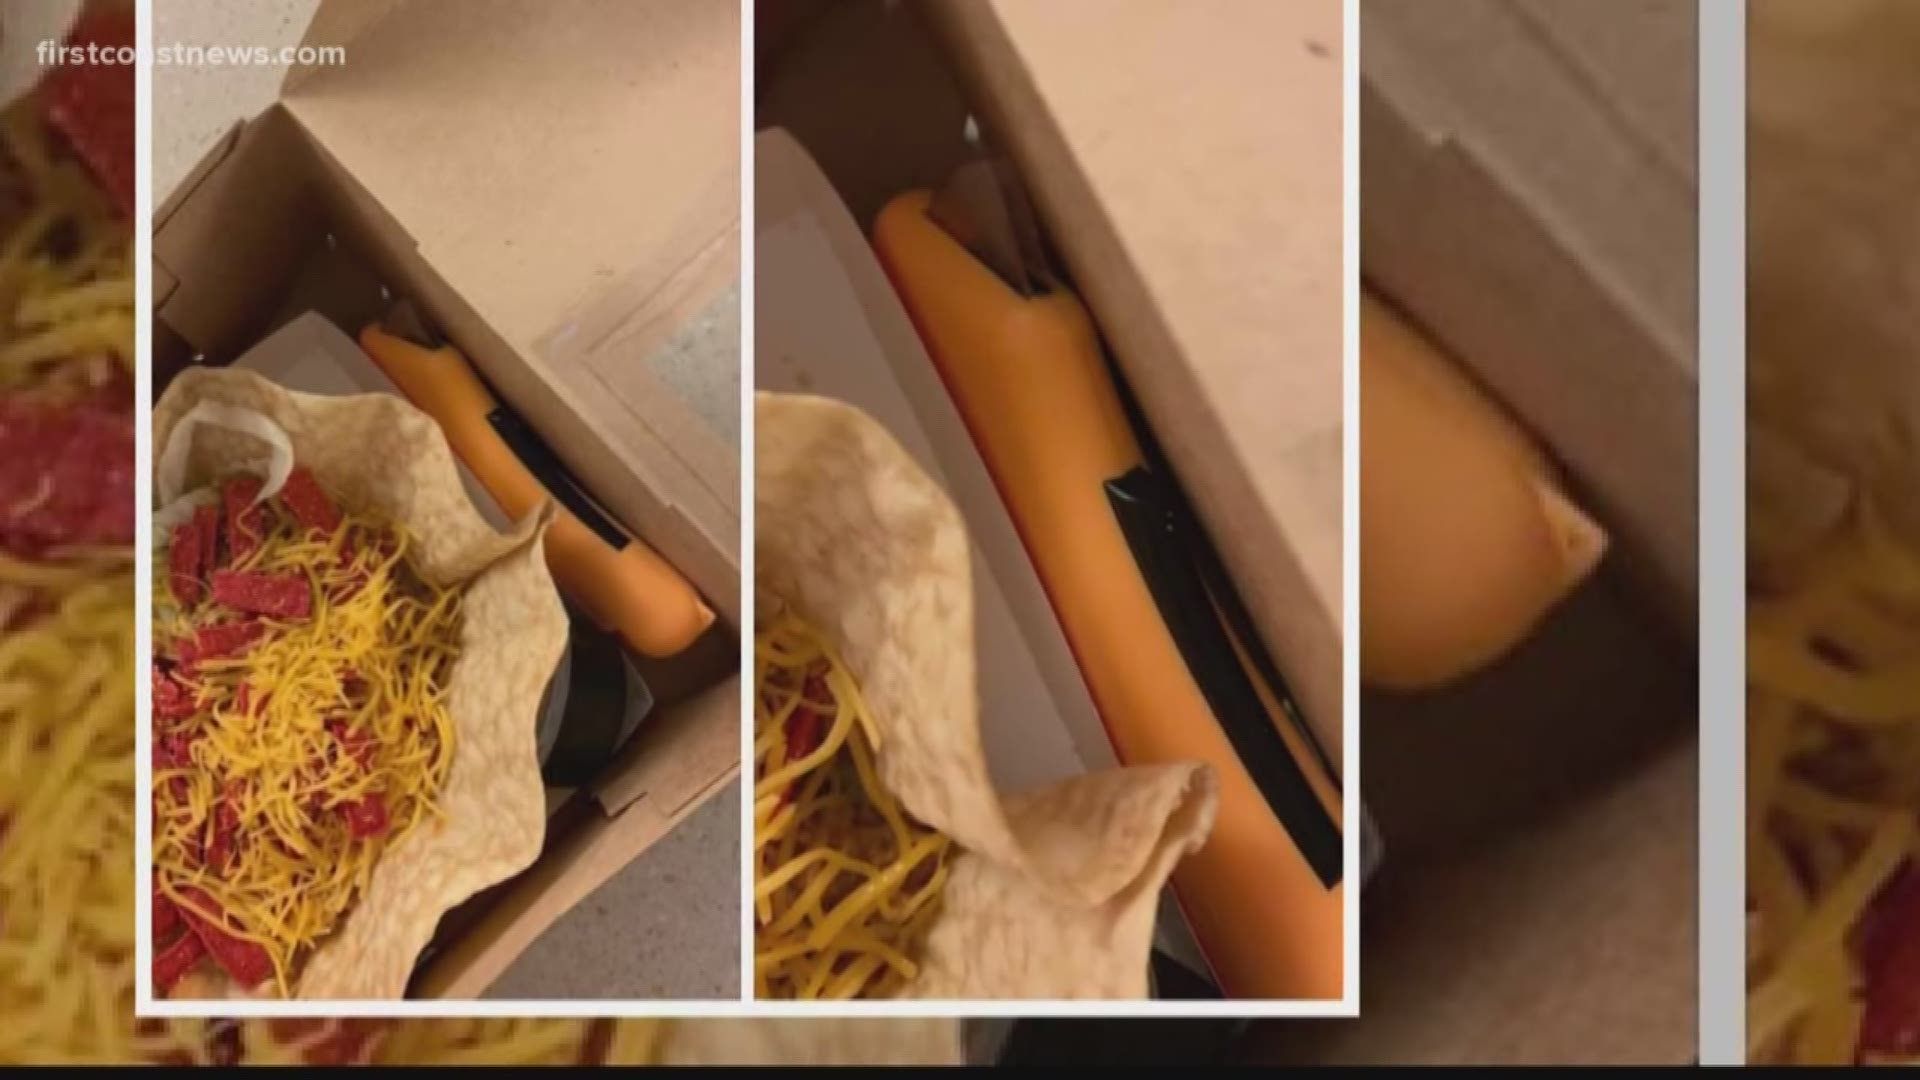 She immediately called the restaurant and told them what she found in her order and was told, "Sorry, it must have fallen in the box."